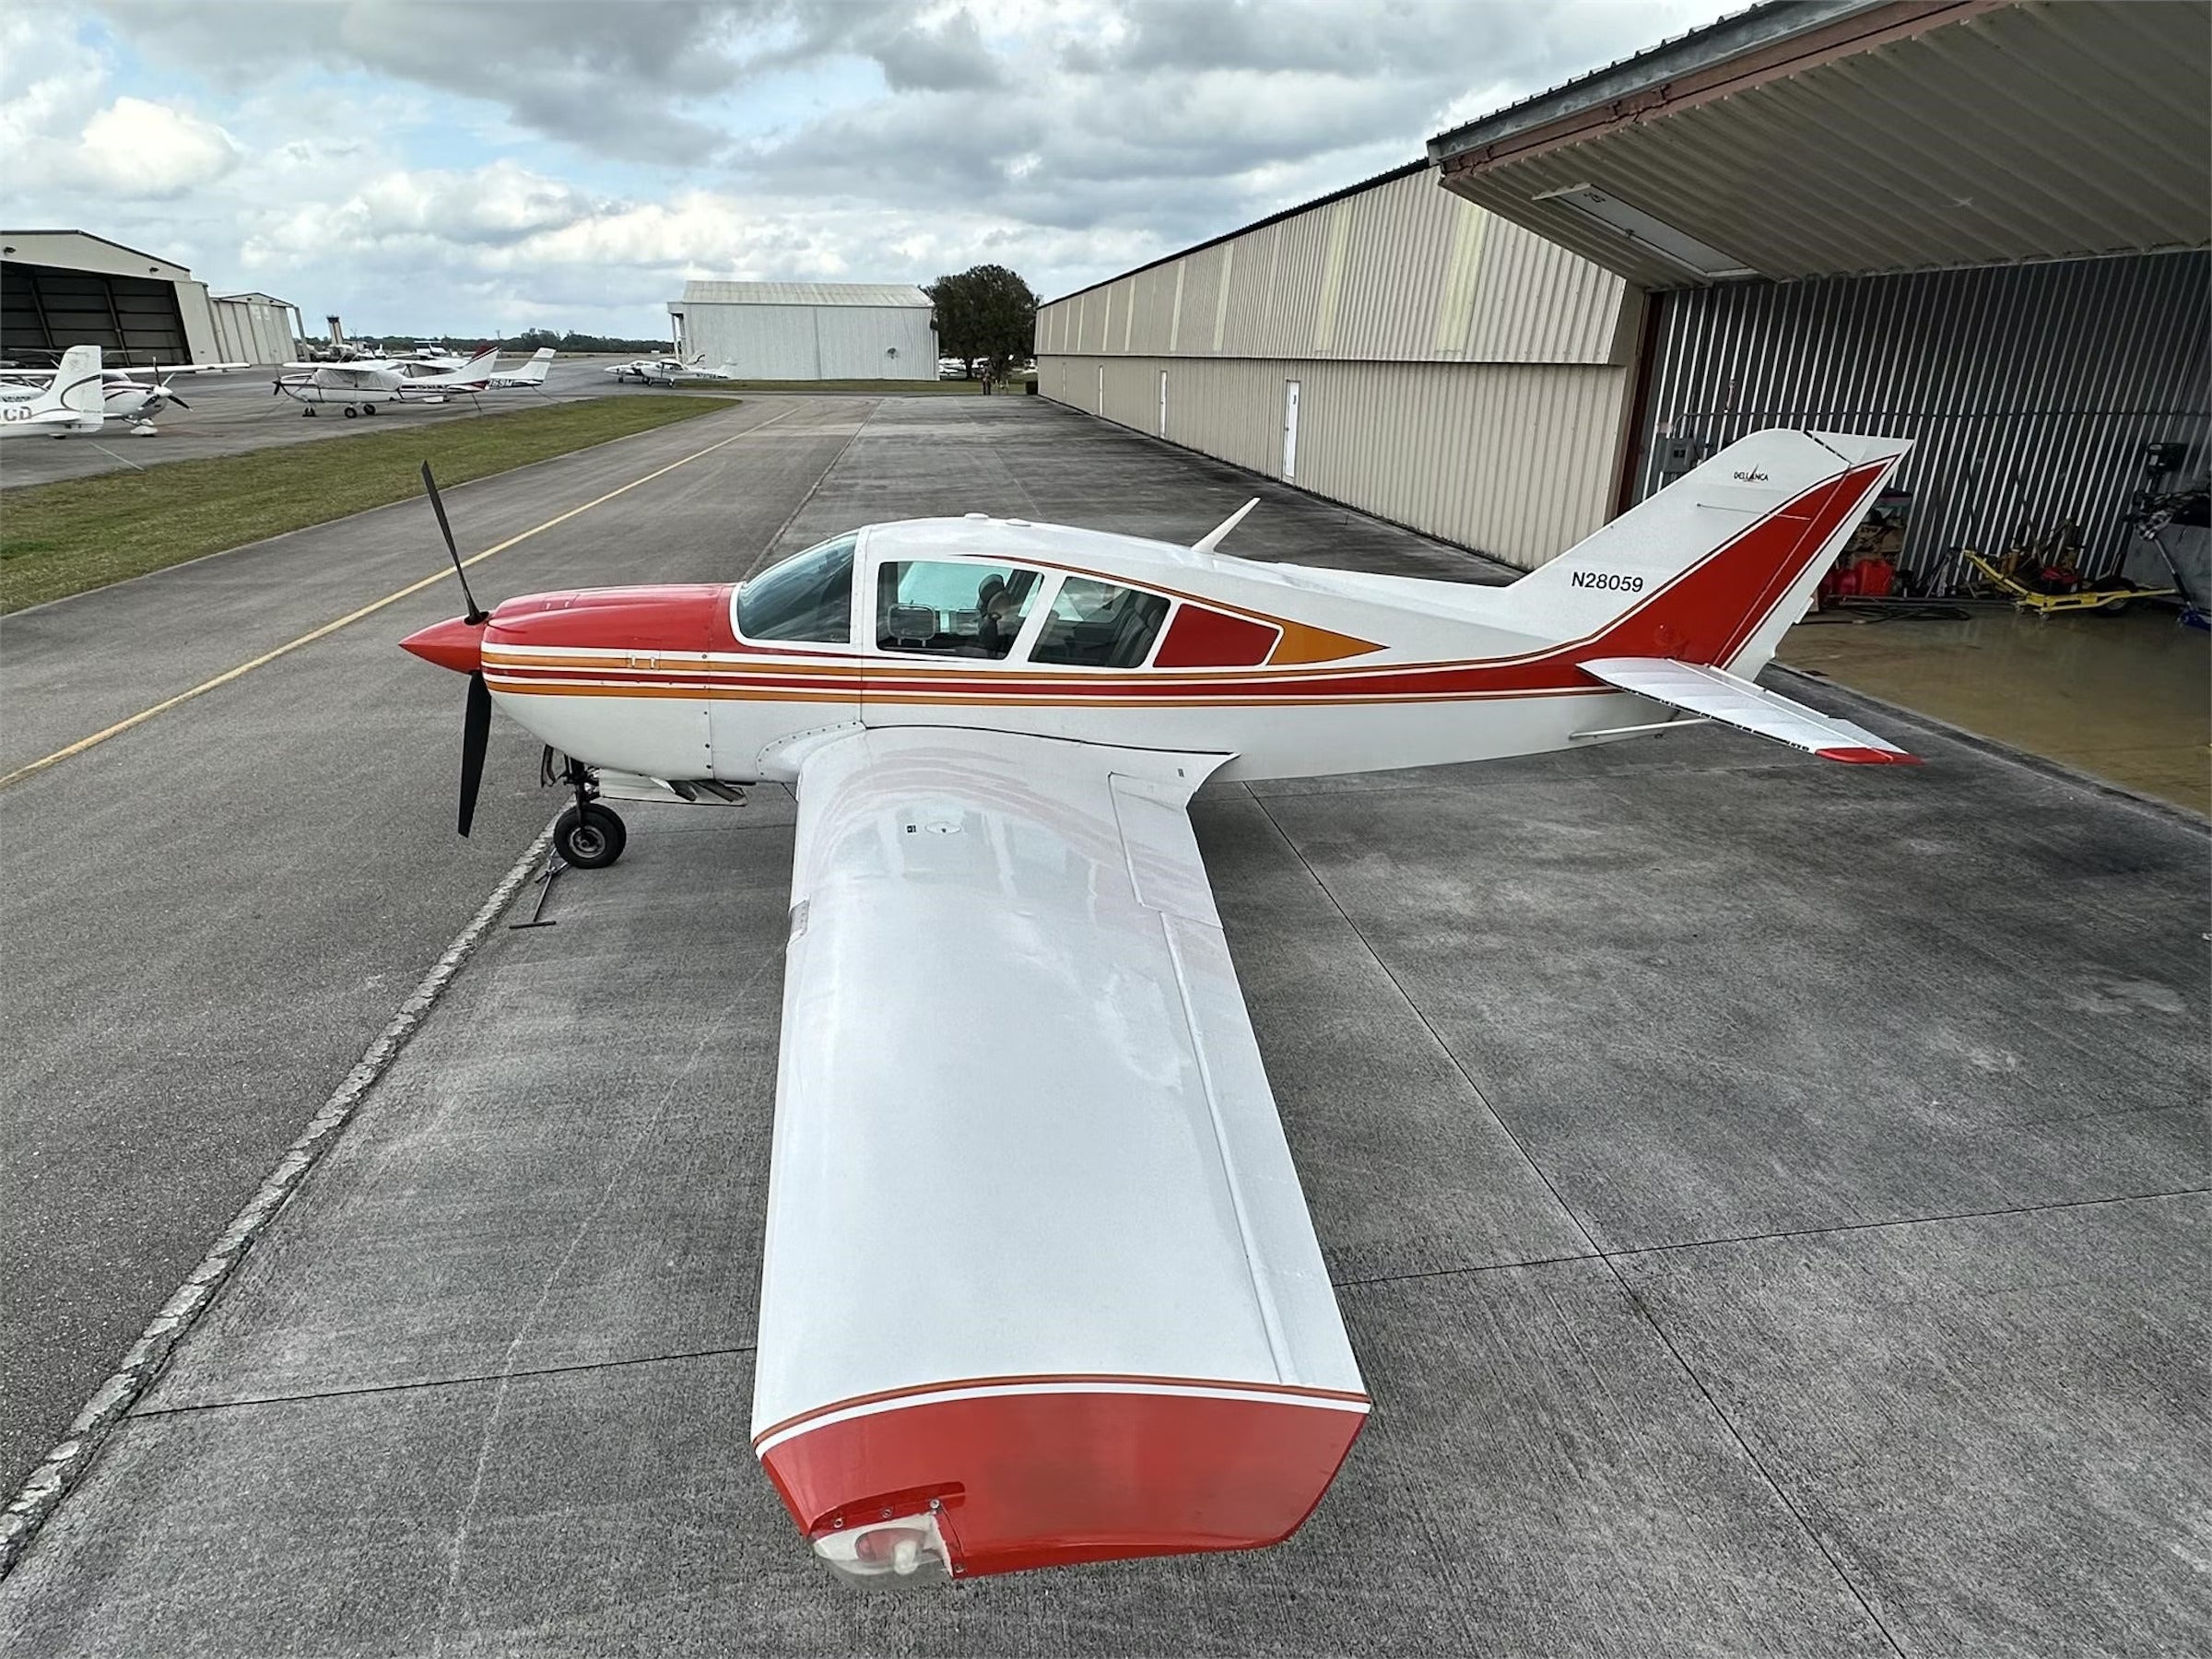 This 1979 Bellanca 17-30 Viking Is a Stealthily Quick ‘AircraftForSale’ Top Pick